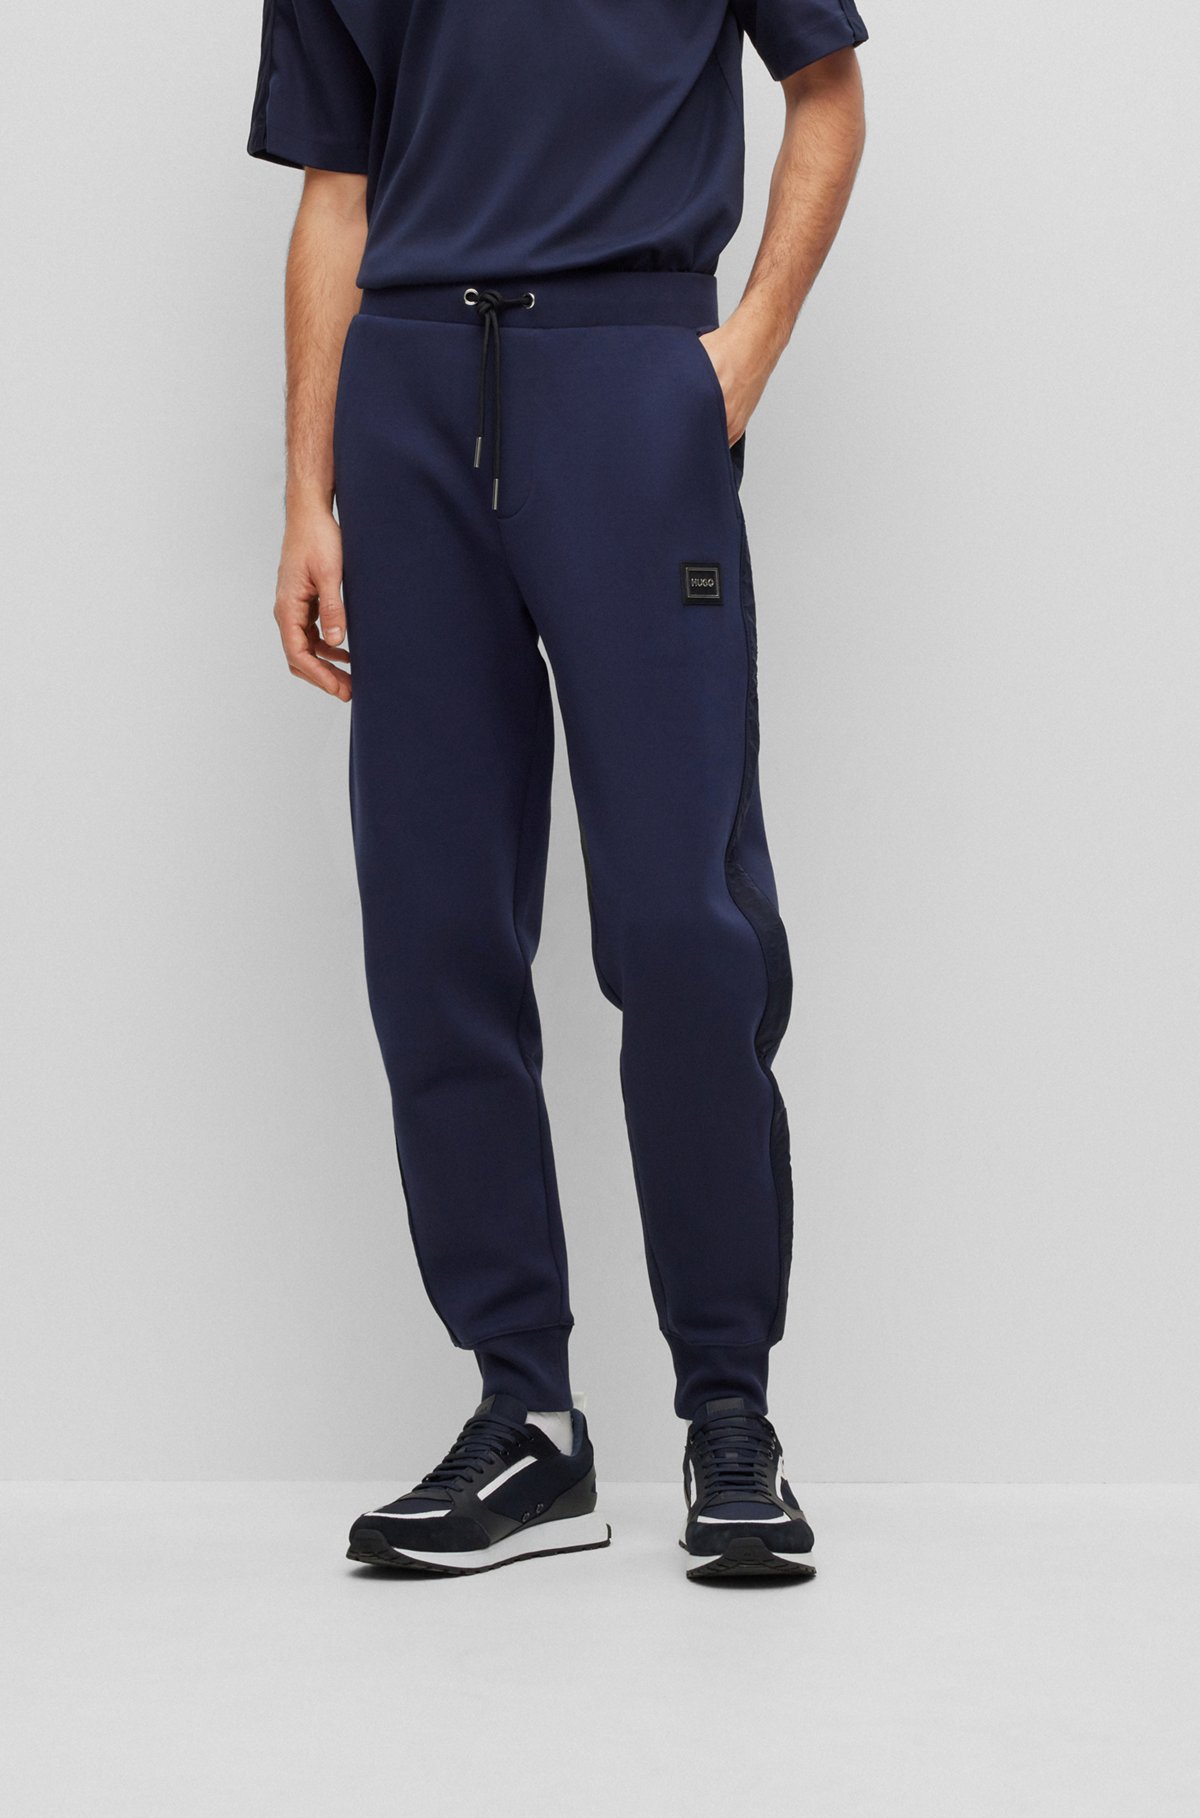 HUGO - Cotton-blend cuffed tracksuit bottoms with side stripes